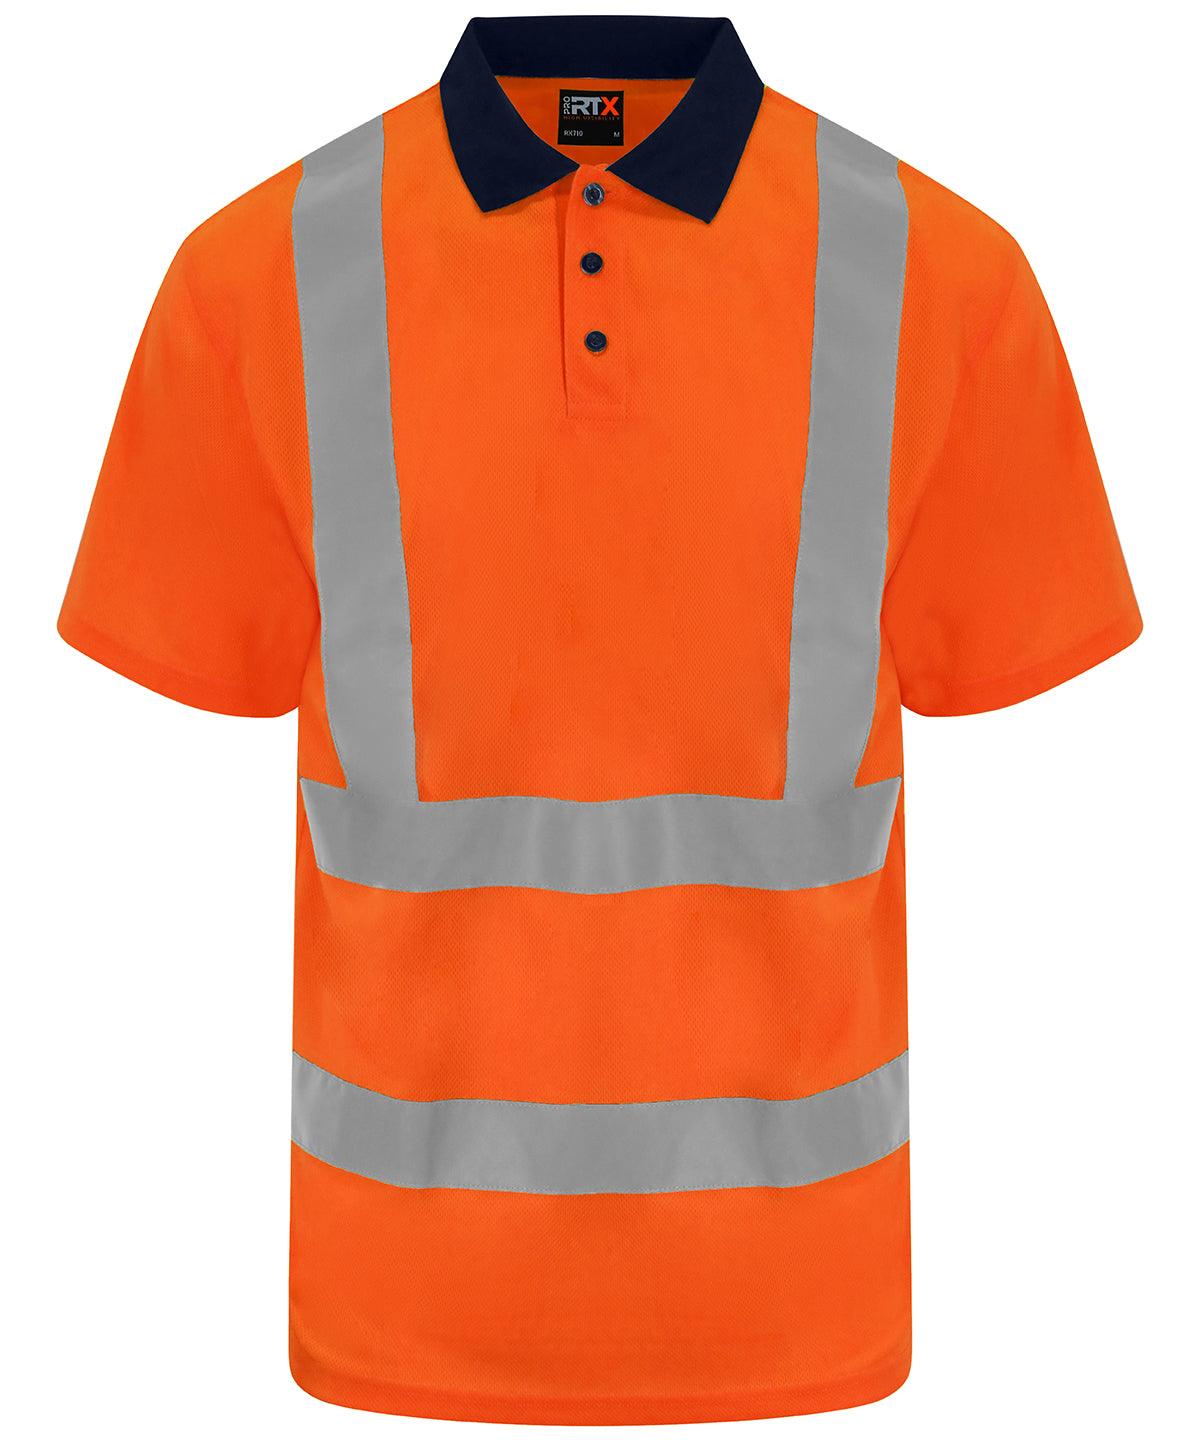 HV Orange/Navy - High visibility polo Polos ProRTX High Visibility Must Haves, Plus Sizes, Polos & Casual, Rebrandable, Safetywear, Workwear Schoolwear Centres